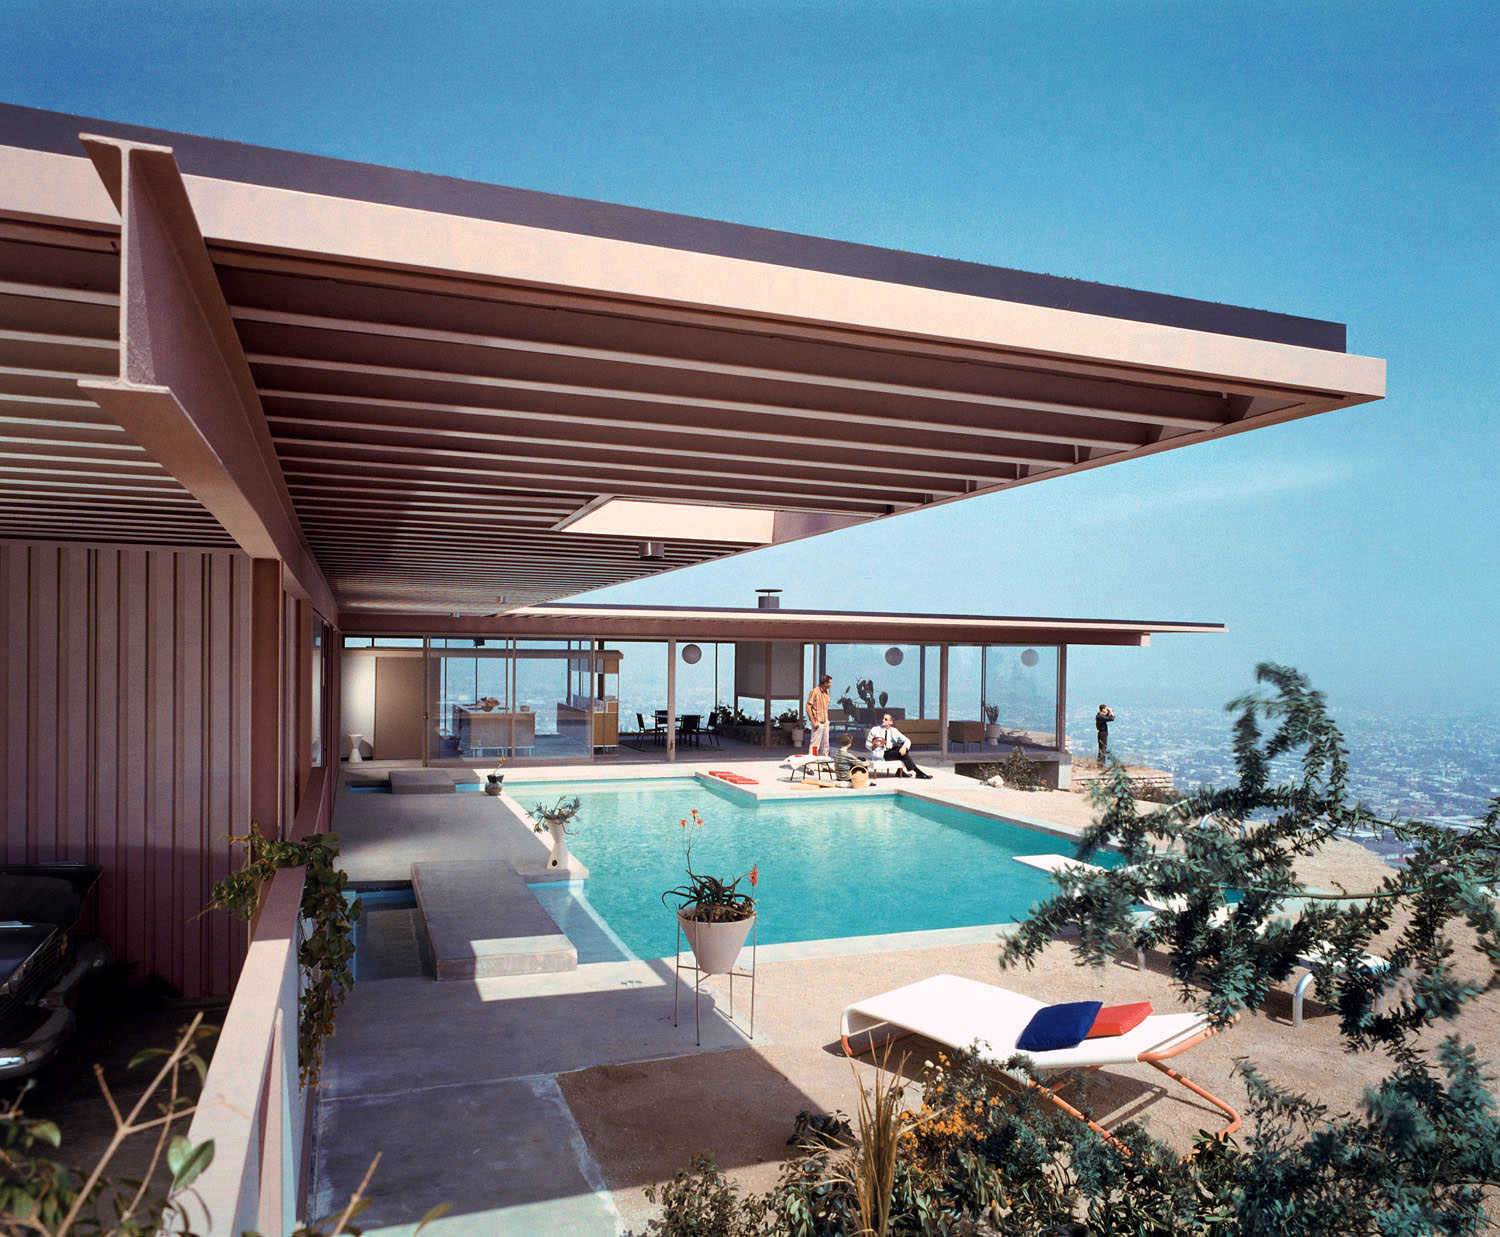 Los Angeles, 1960. "Case Study House No. 22. Stahl Residence, 1635 Woods Drive. Architect: Pierre Koenig." Color transparency by Julius Shulman. More to come on this house, which has achieved a measure of fame in the annals of modern architecture due a certain black-and-white photograph. View full size.